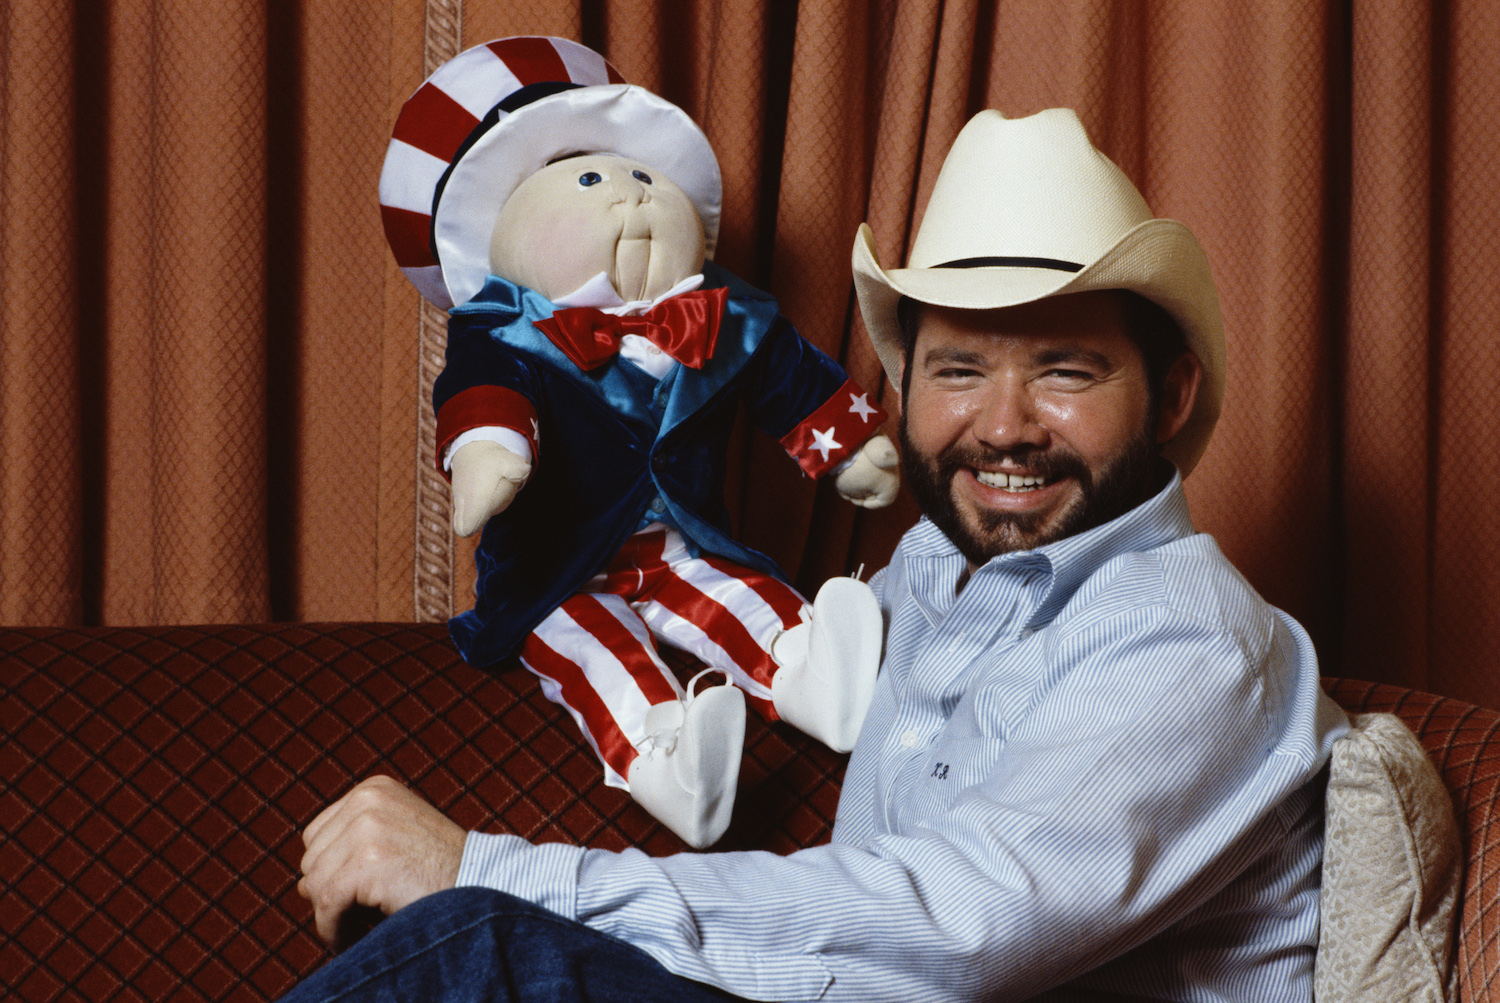 1979 cabbage patch doll